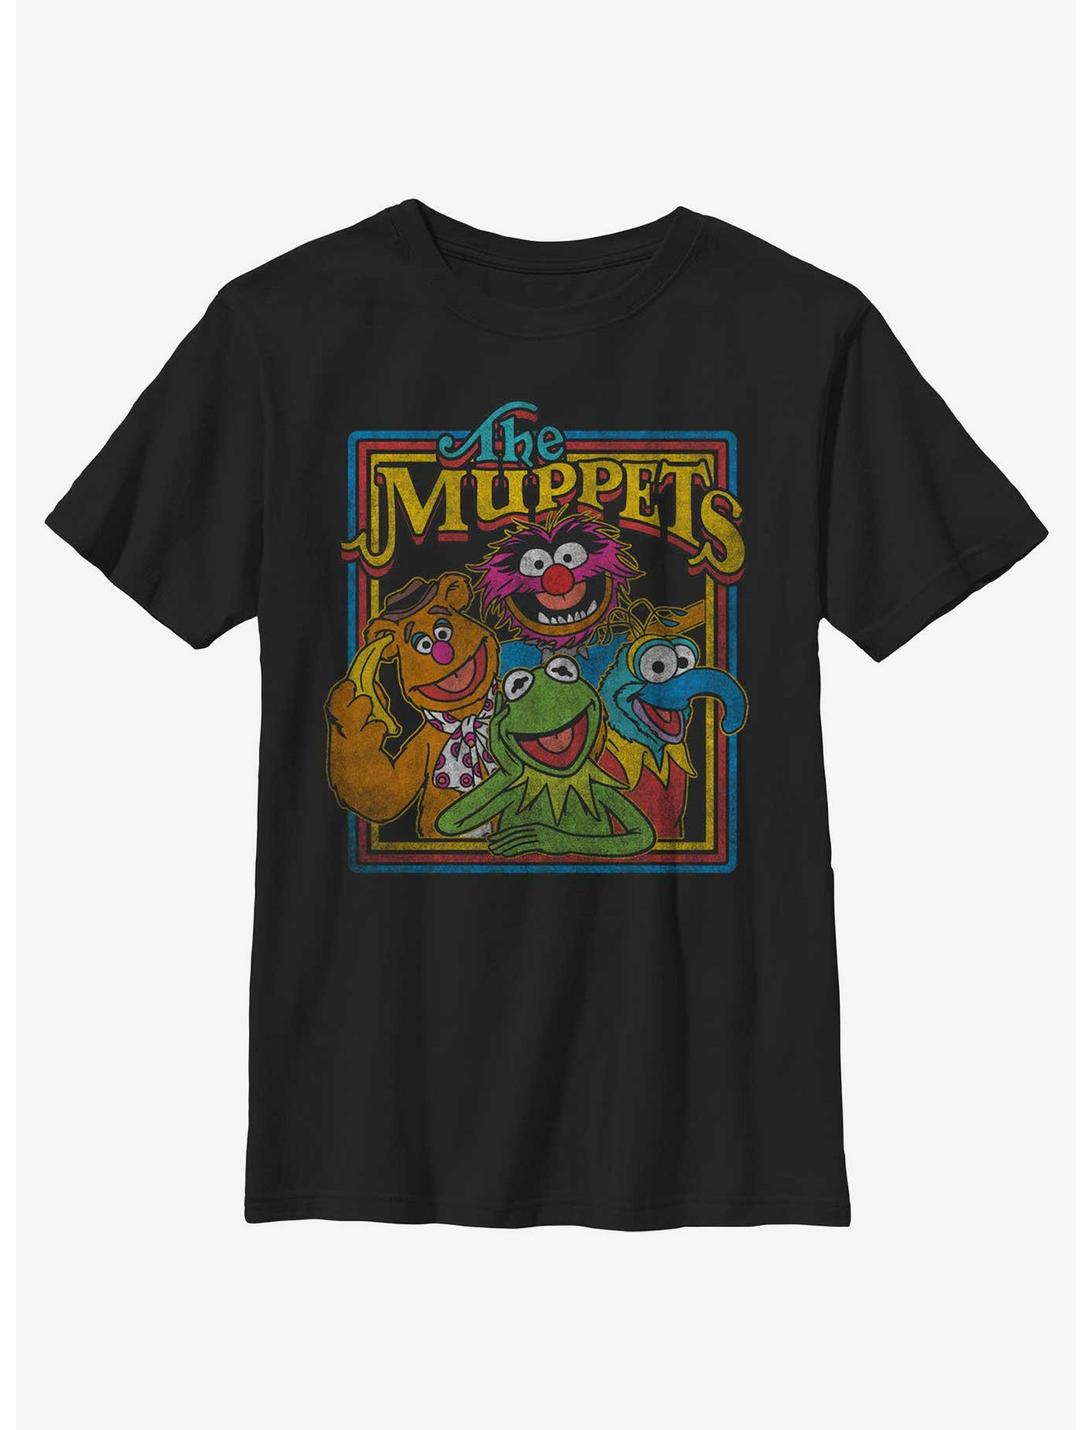 Disney The Muppets Retro Muppet Poster Youth T-Shirt, BLACK, hi-res